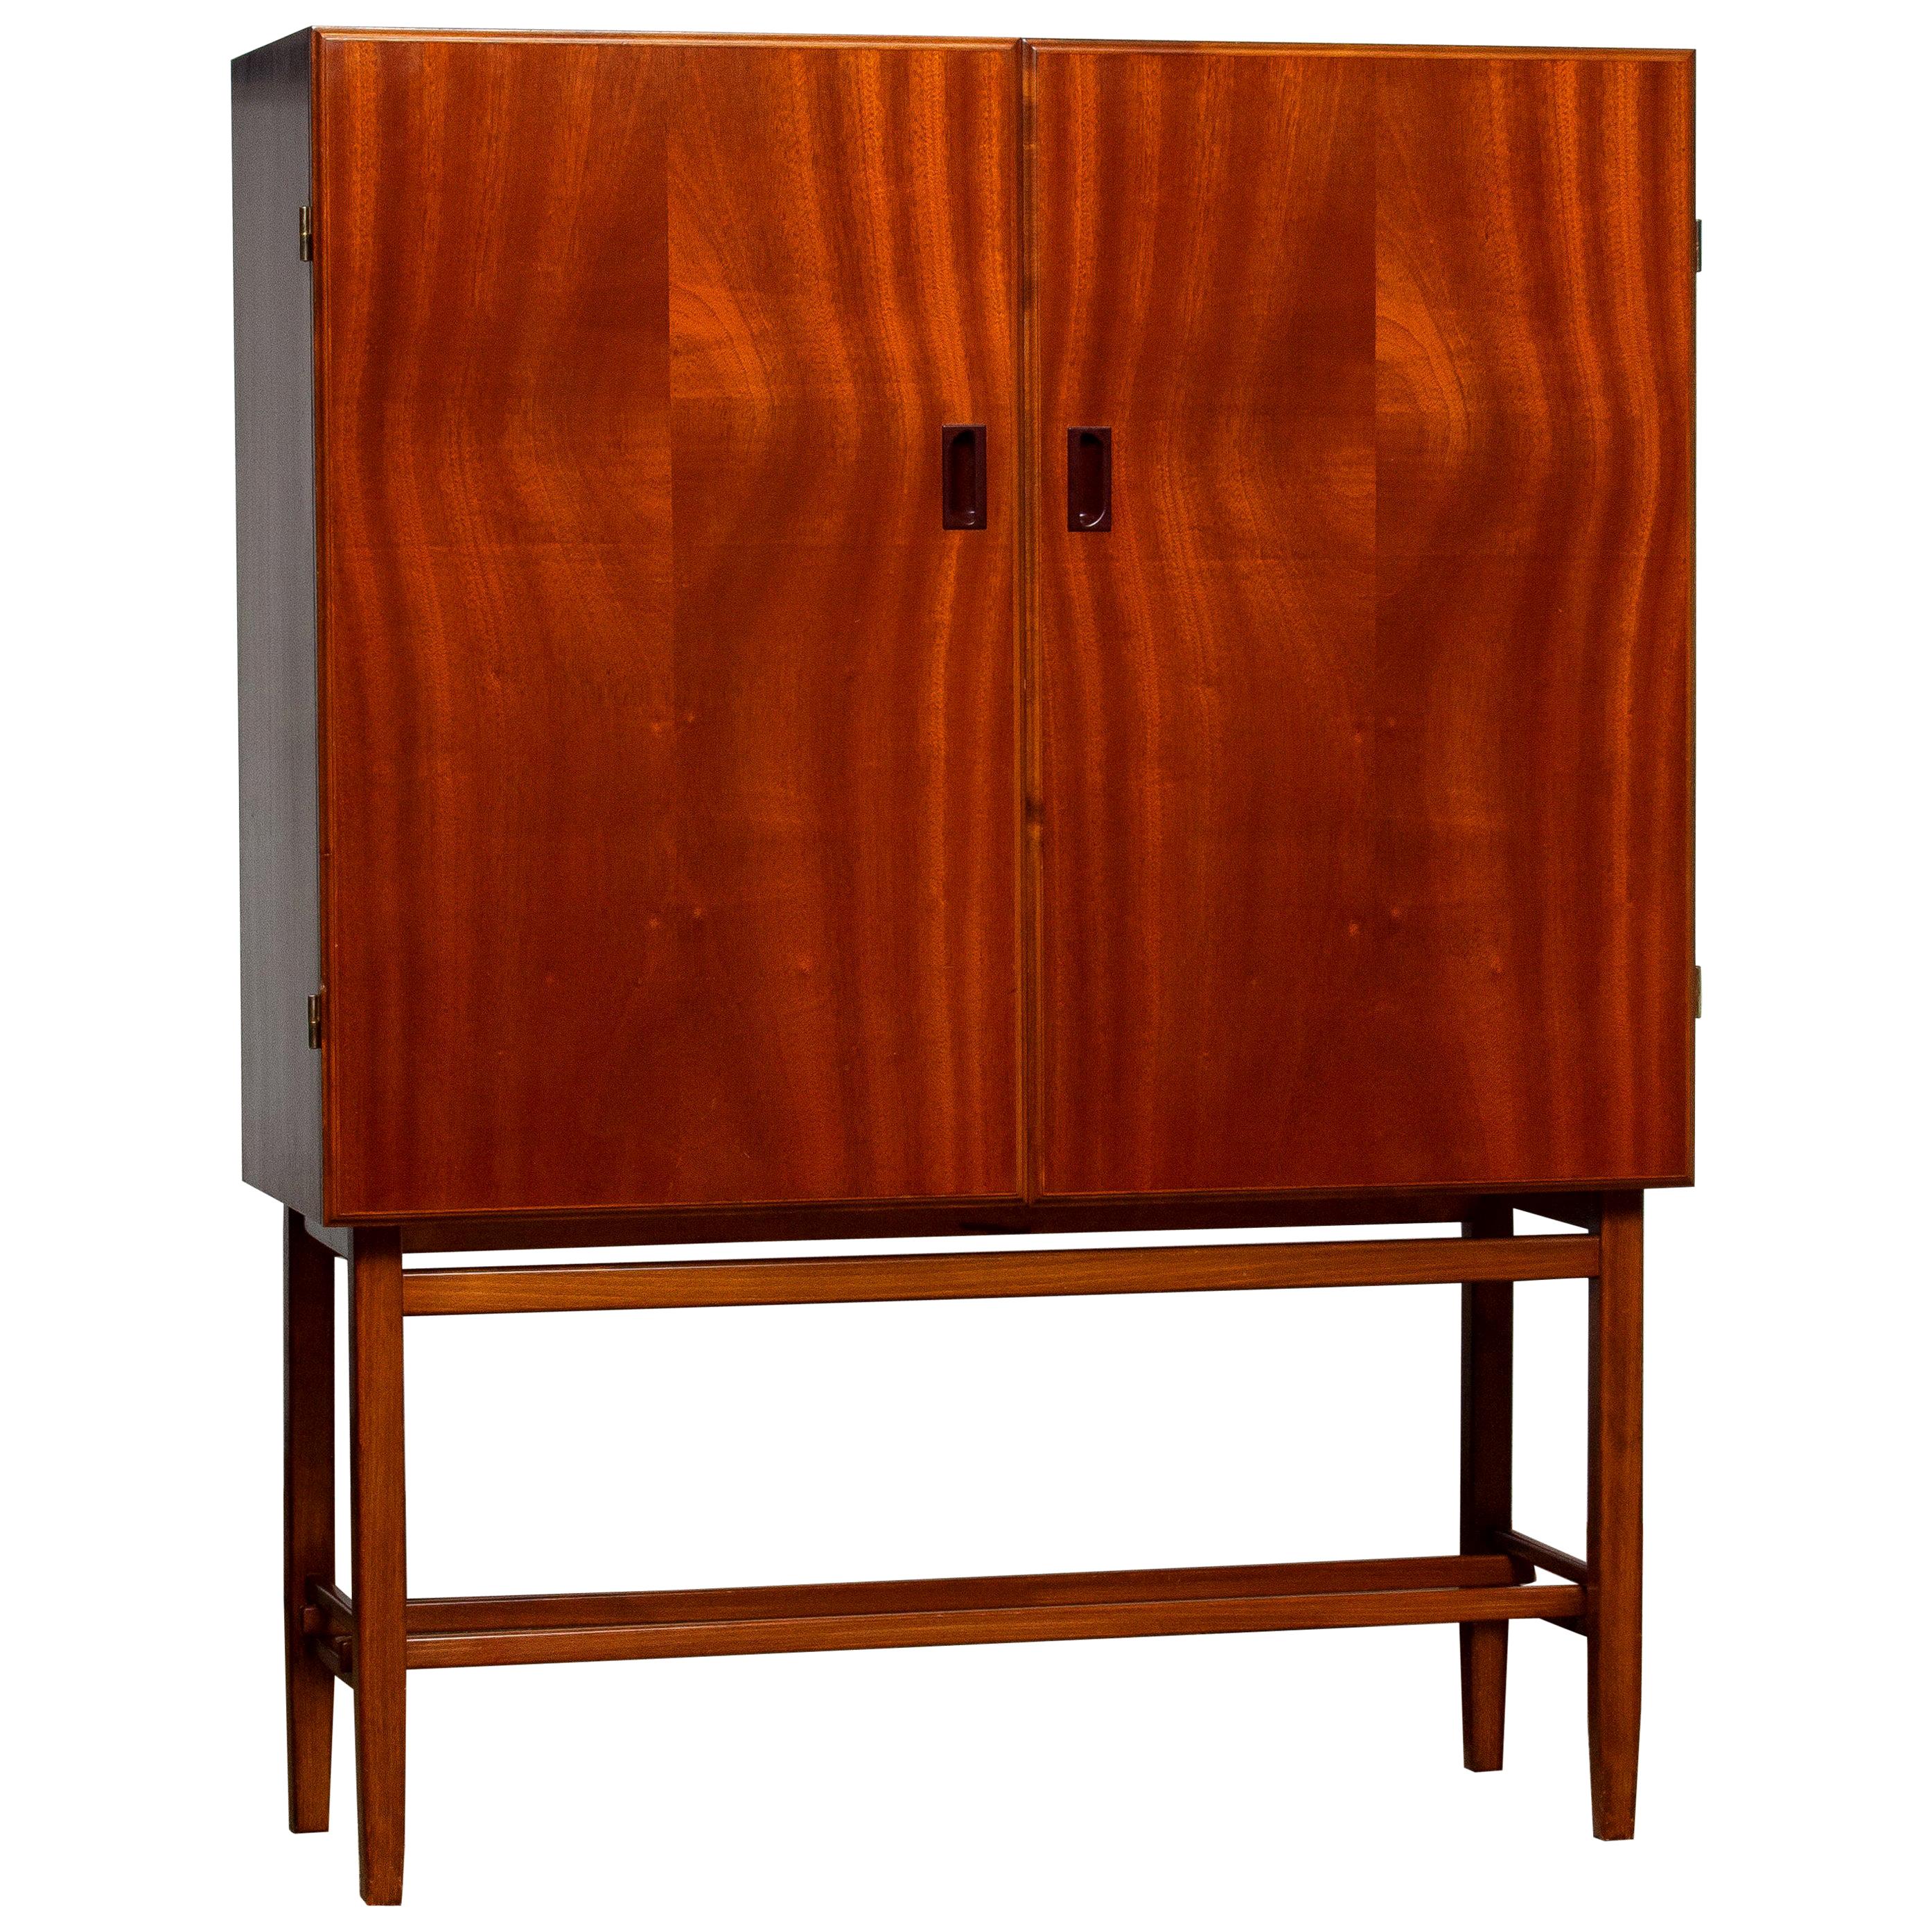 1950s, Slim Midcentury Mahogany Dry Bar / Cabinet by Forenades Mobler, Sweden